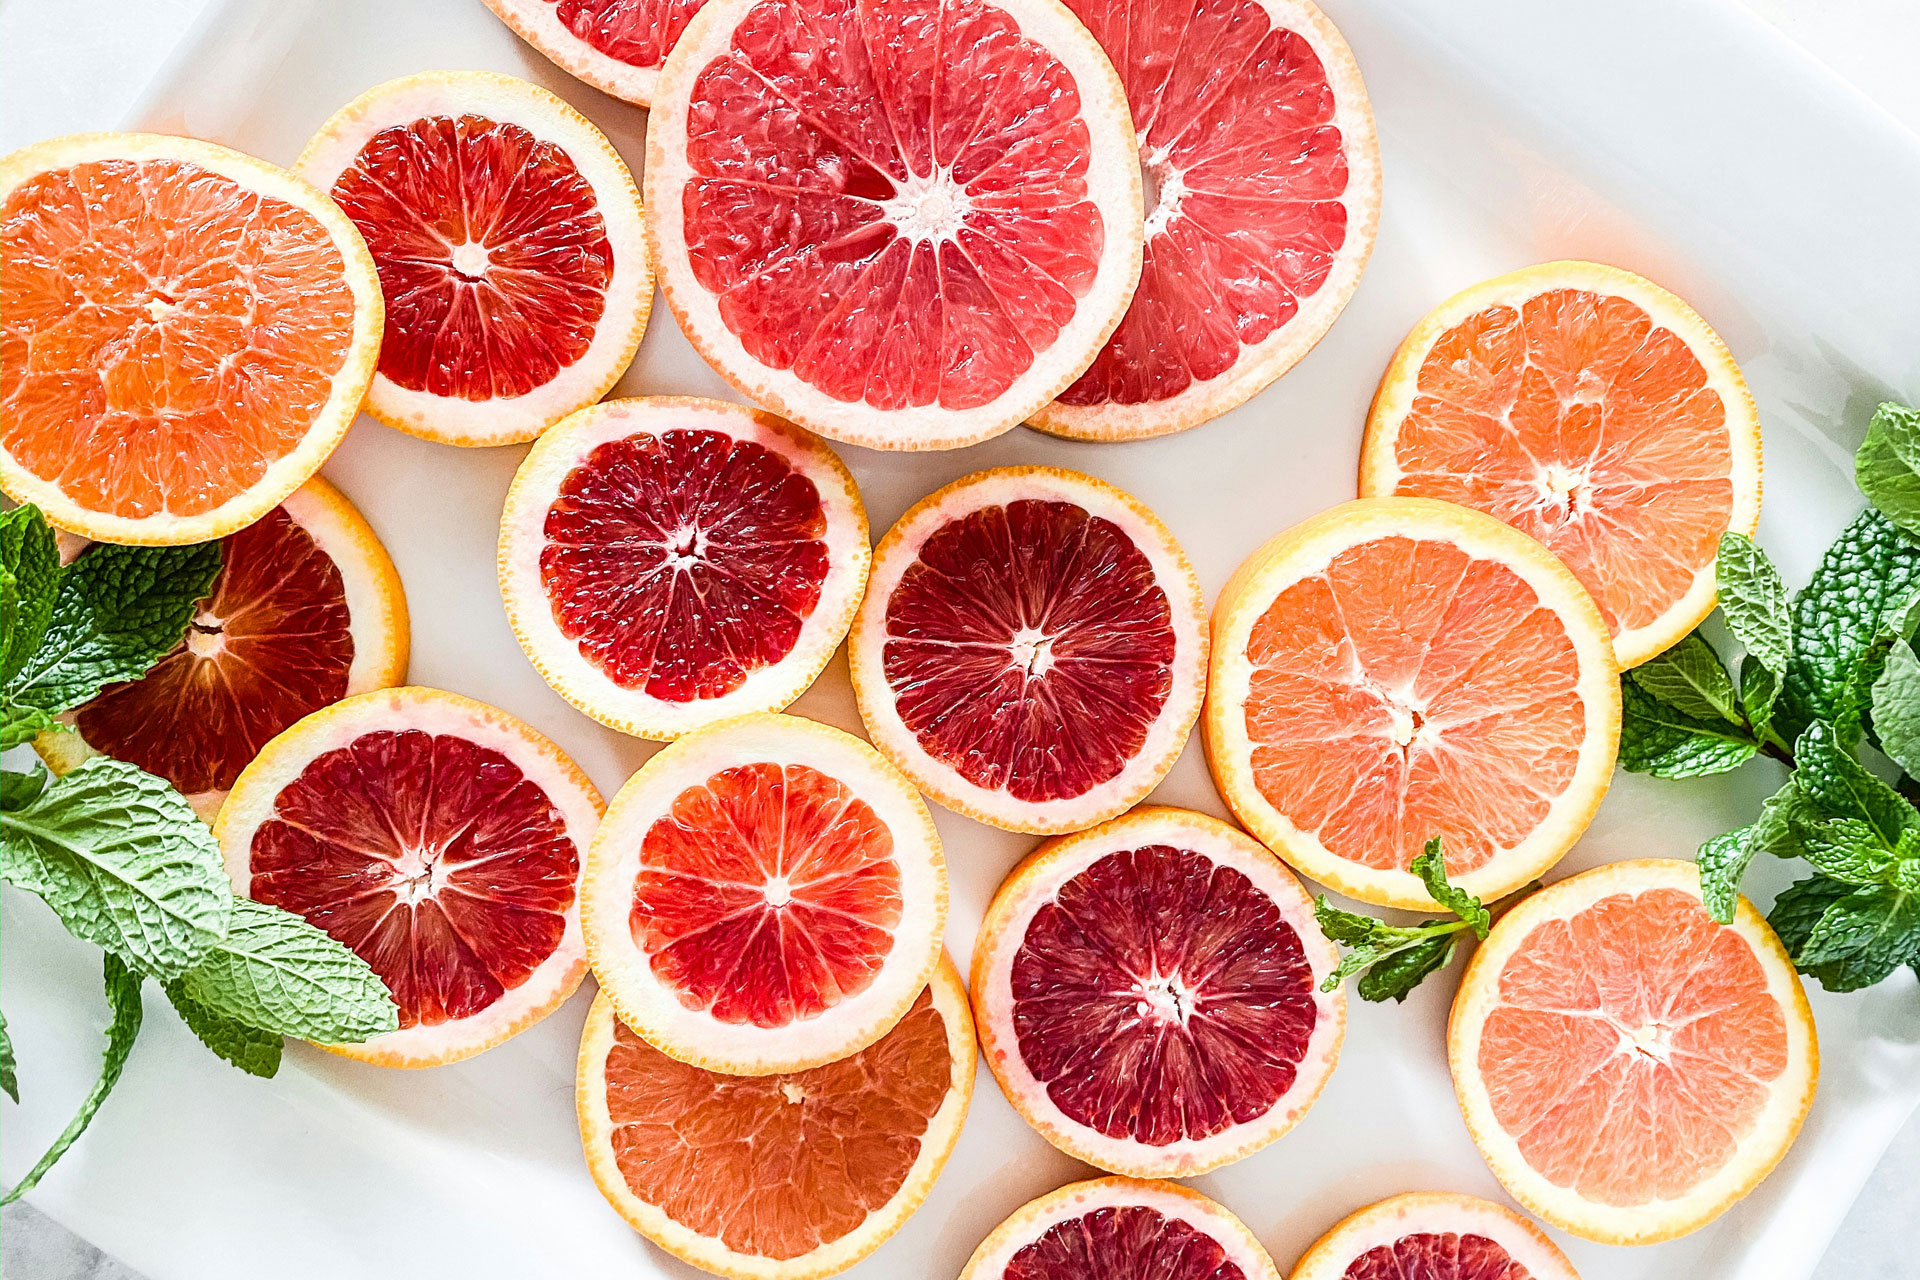 Should We Be Eating Grapefruit With Our Tea?